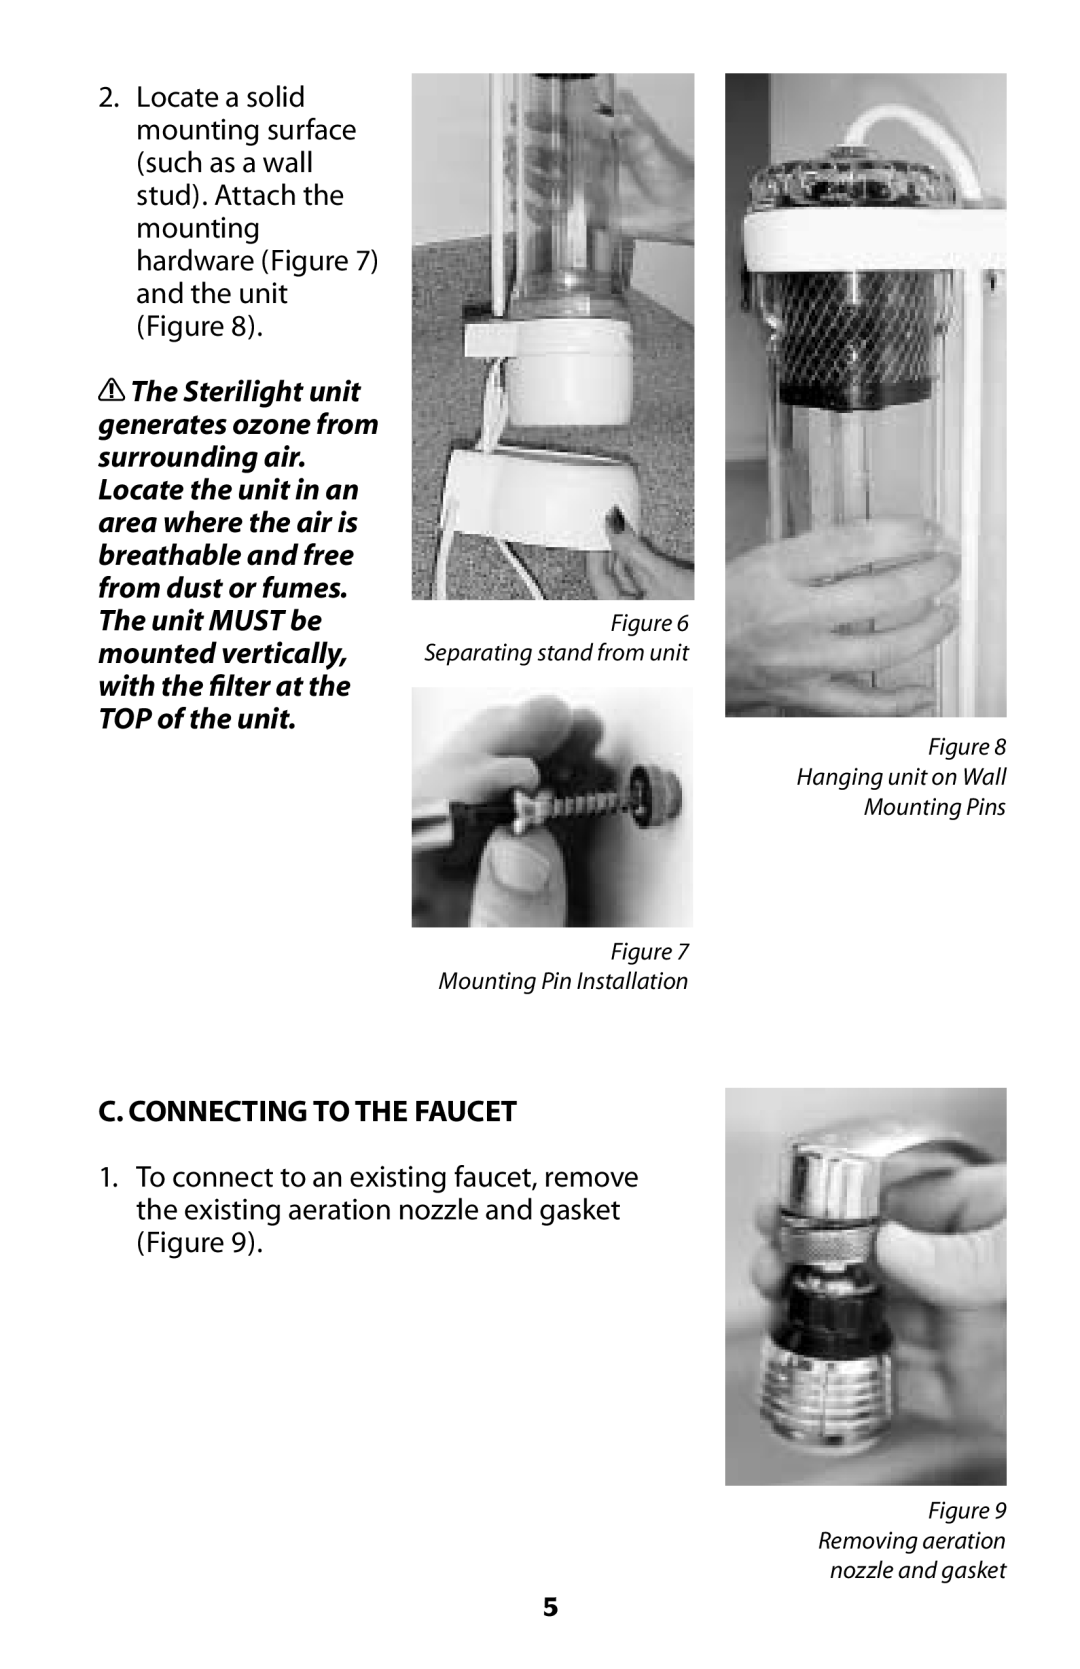 Sterilite Point-of-Use Drinking Water System C. Connecting To The Faucet, Figure Separating stand from unit Figure 